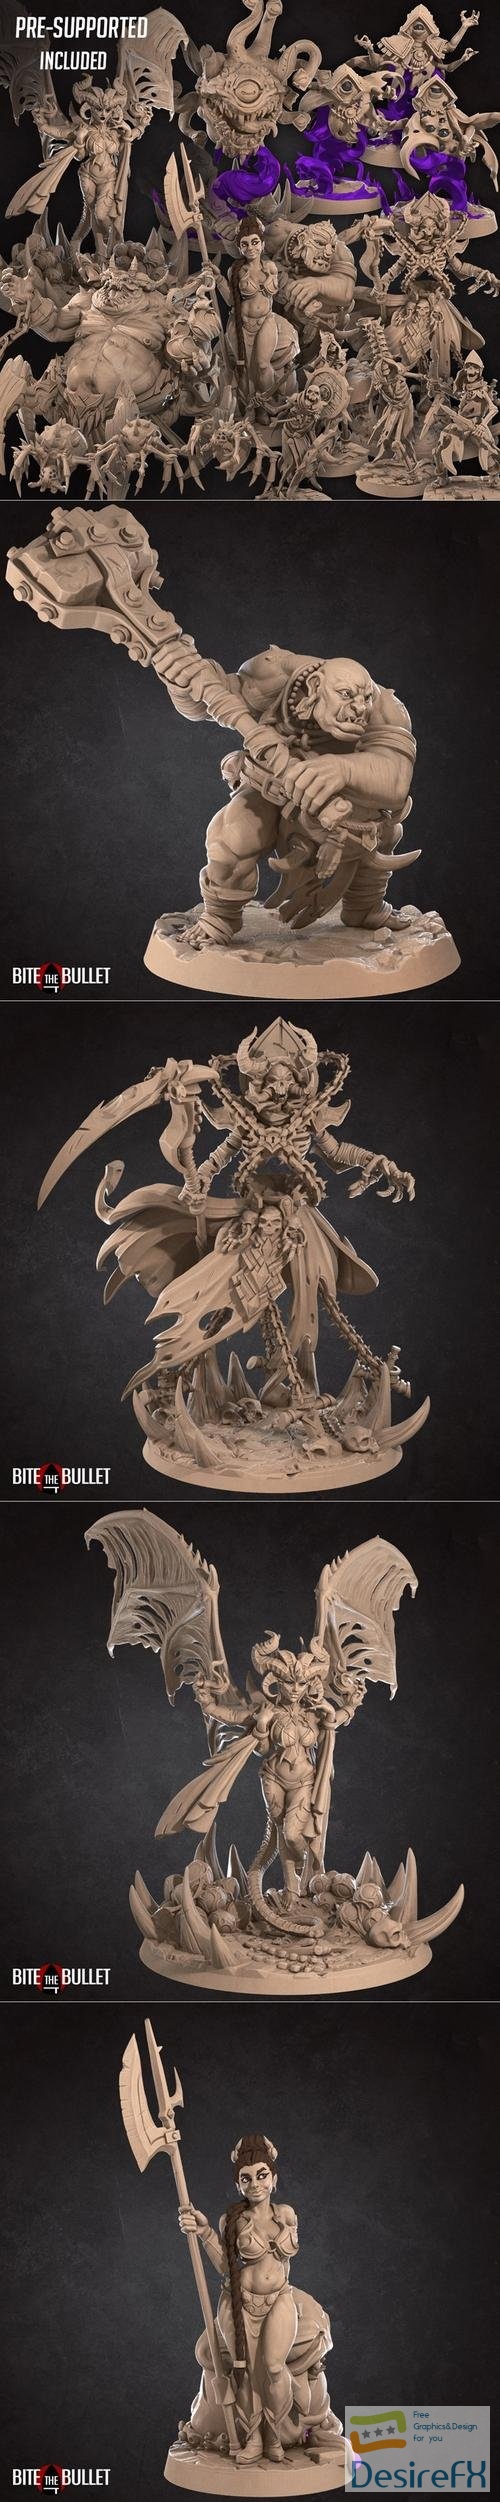 Bite the Bullet - Dungeon (Undeads) – 3D Print